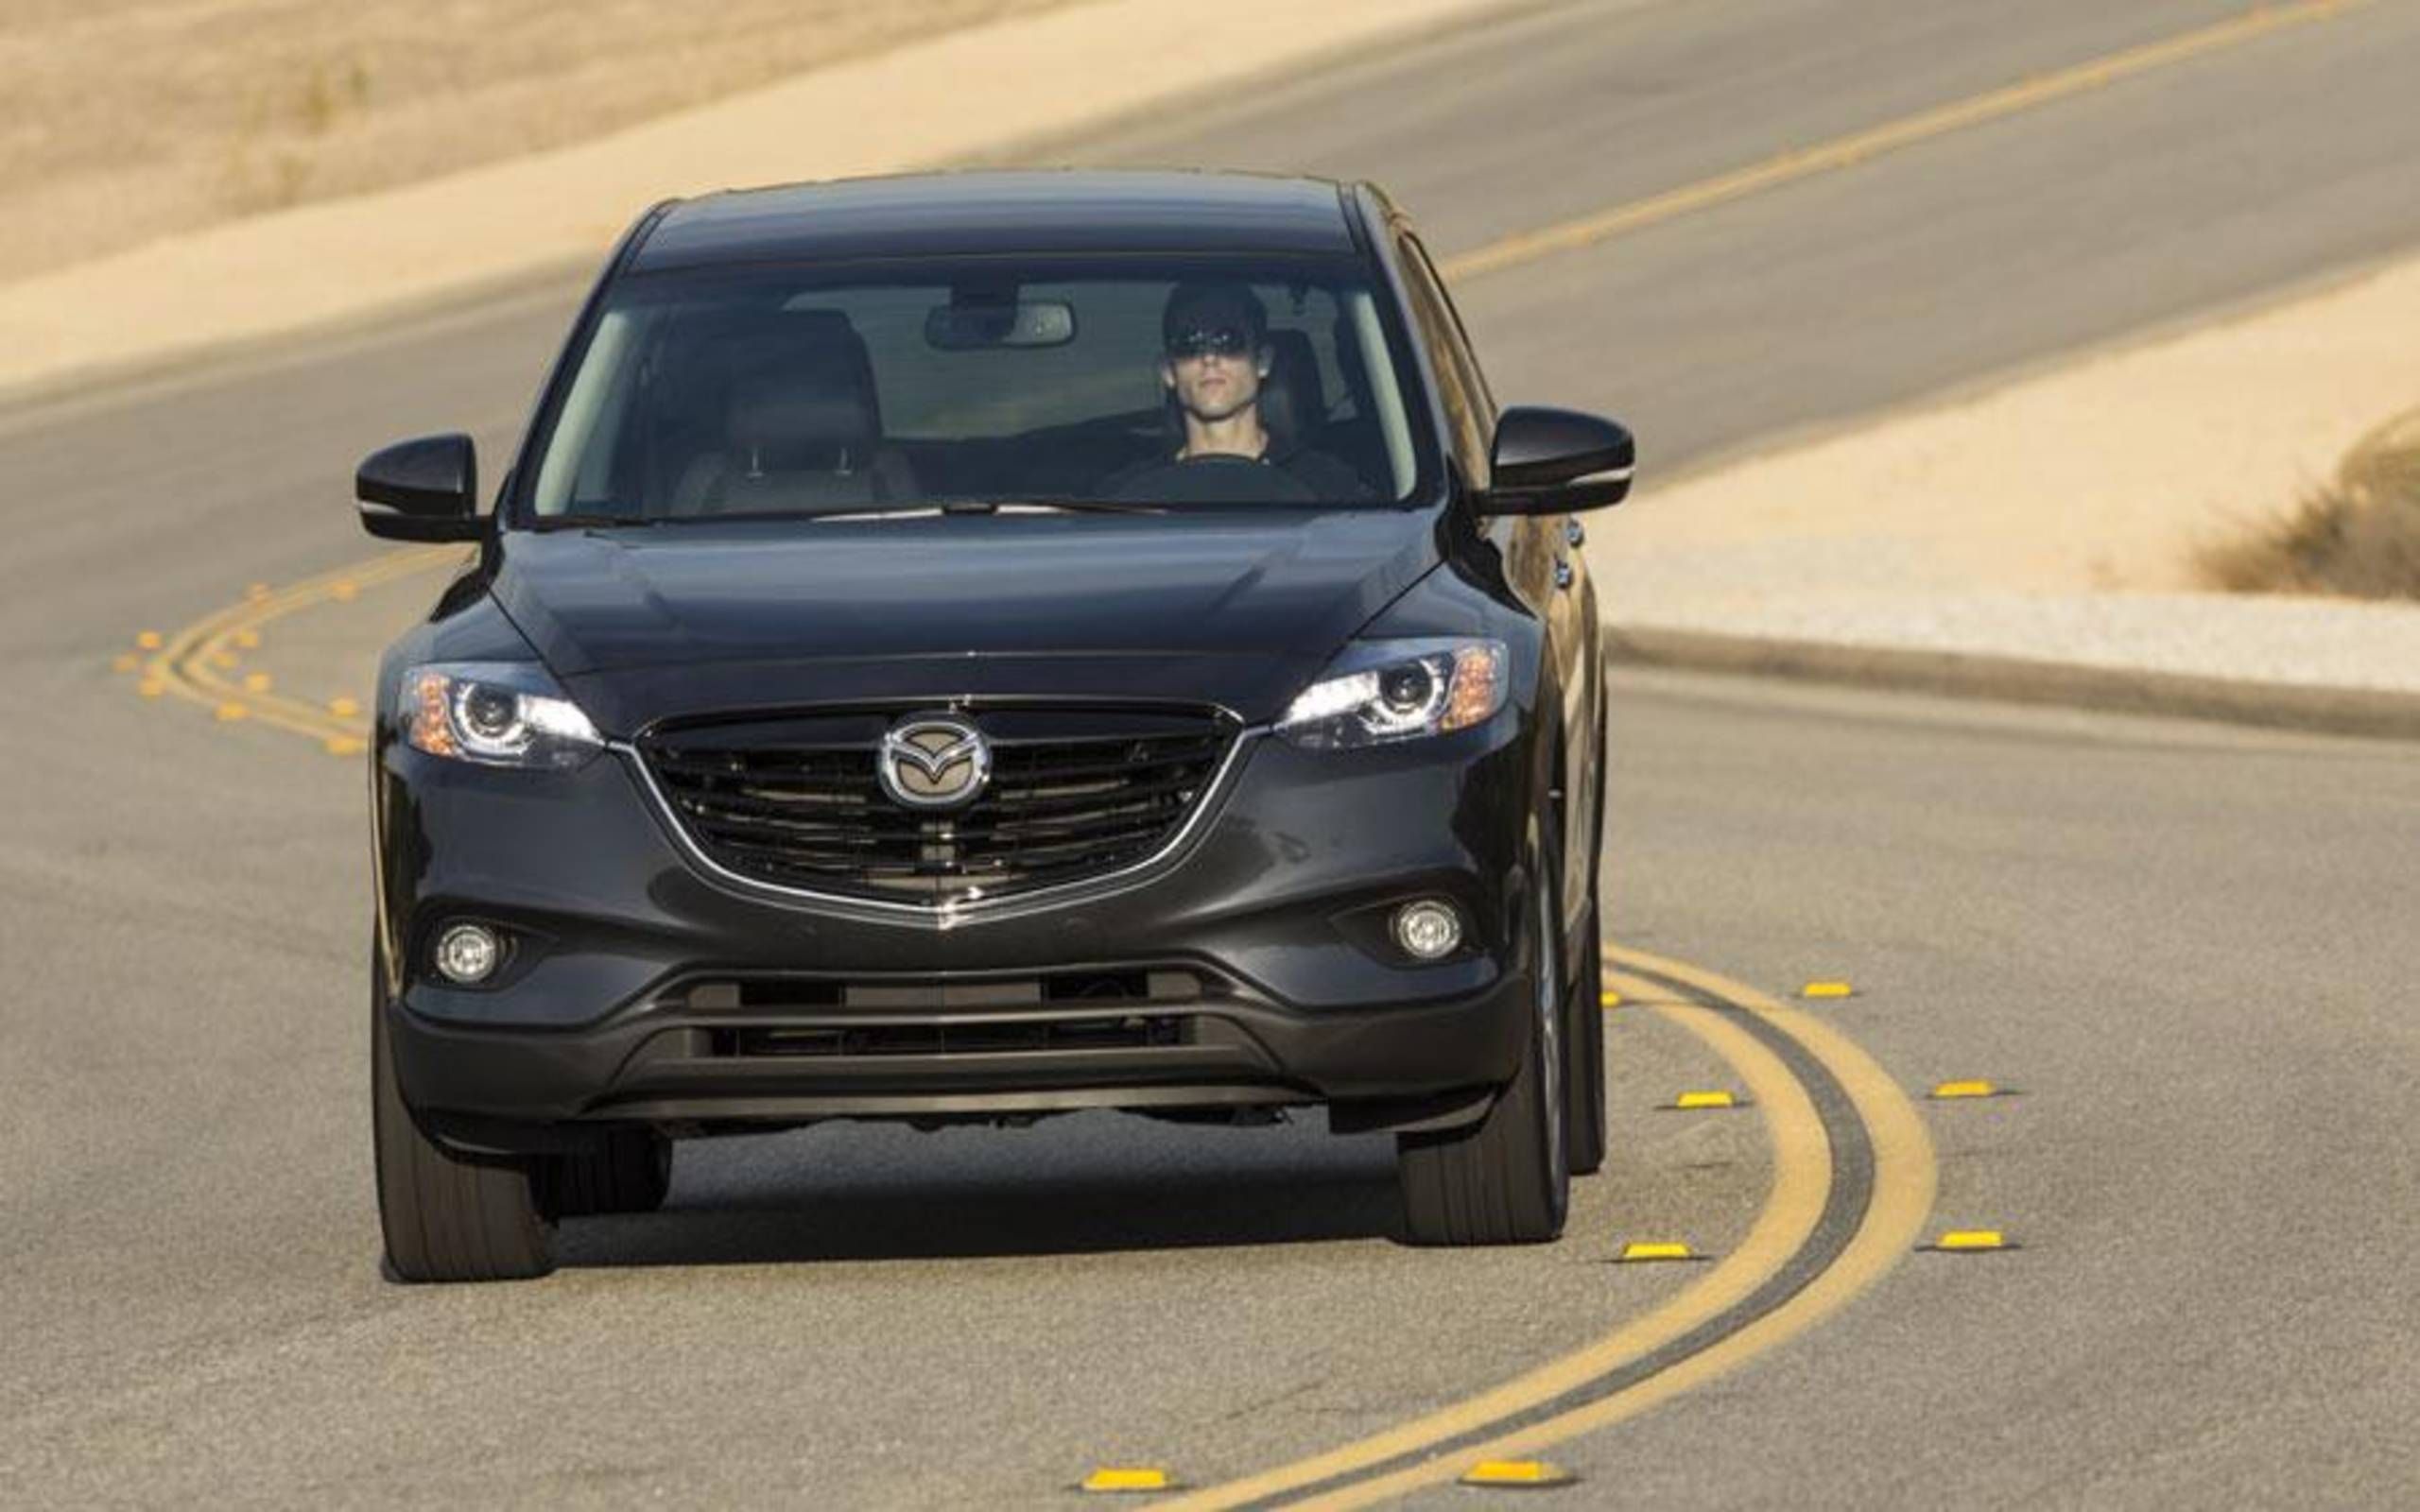 2014 Mazda CX-9 Grand Touring review notes